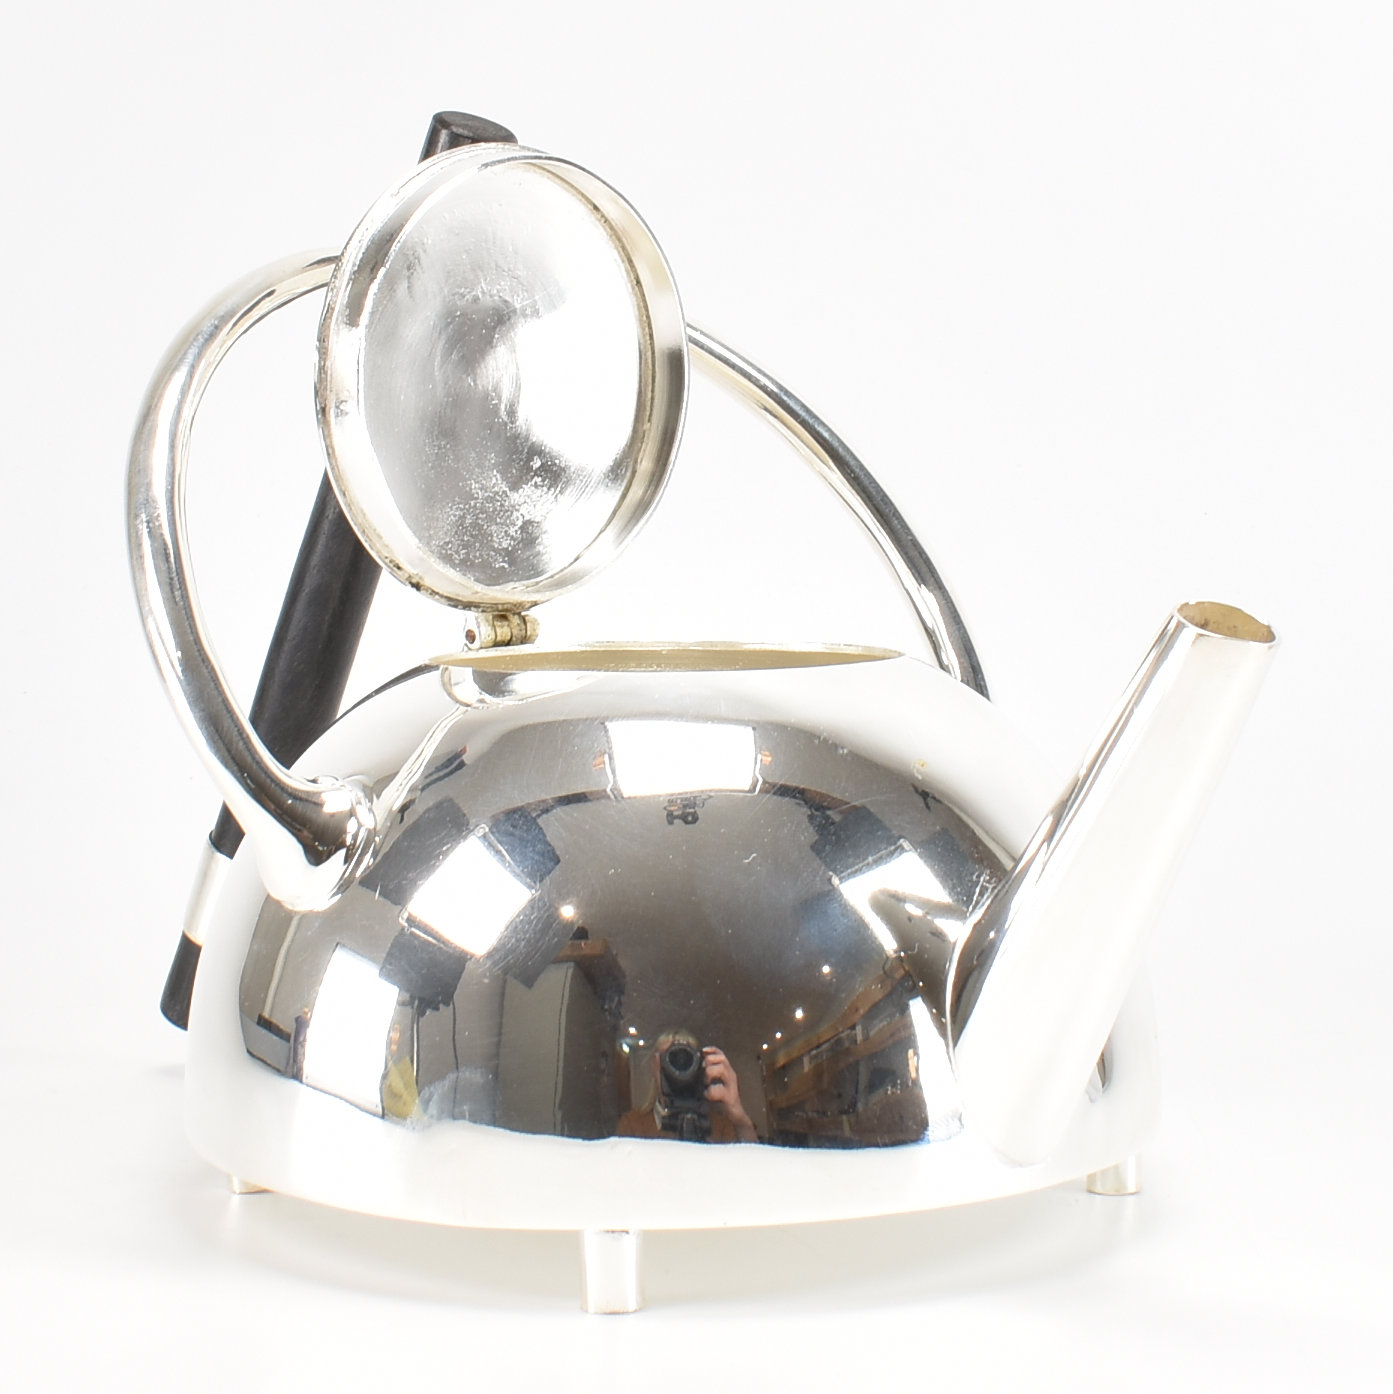 SILVER PLATED CHRISTOPHER DRESSER STYLE TEA POT - Image 2 of 4